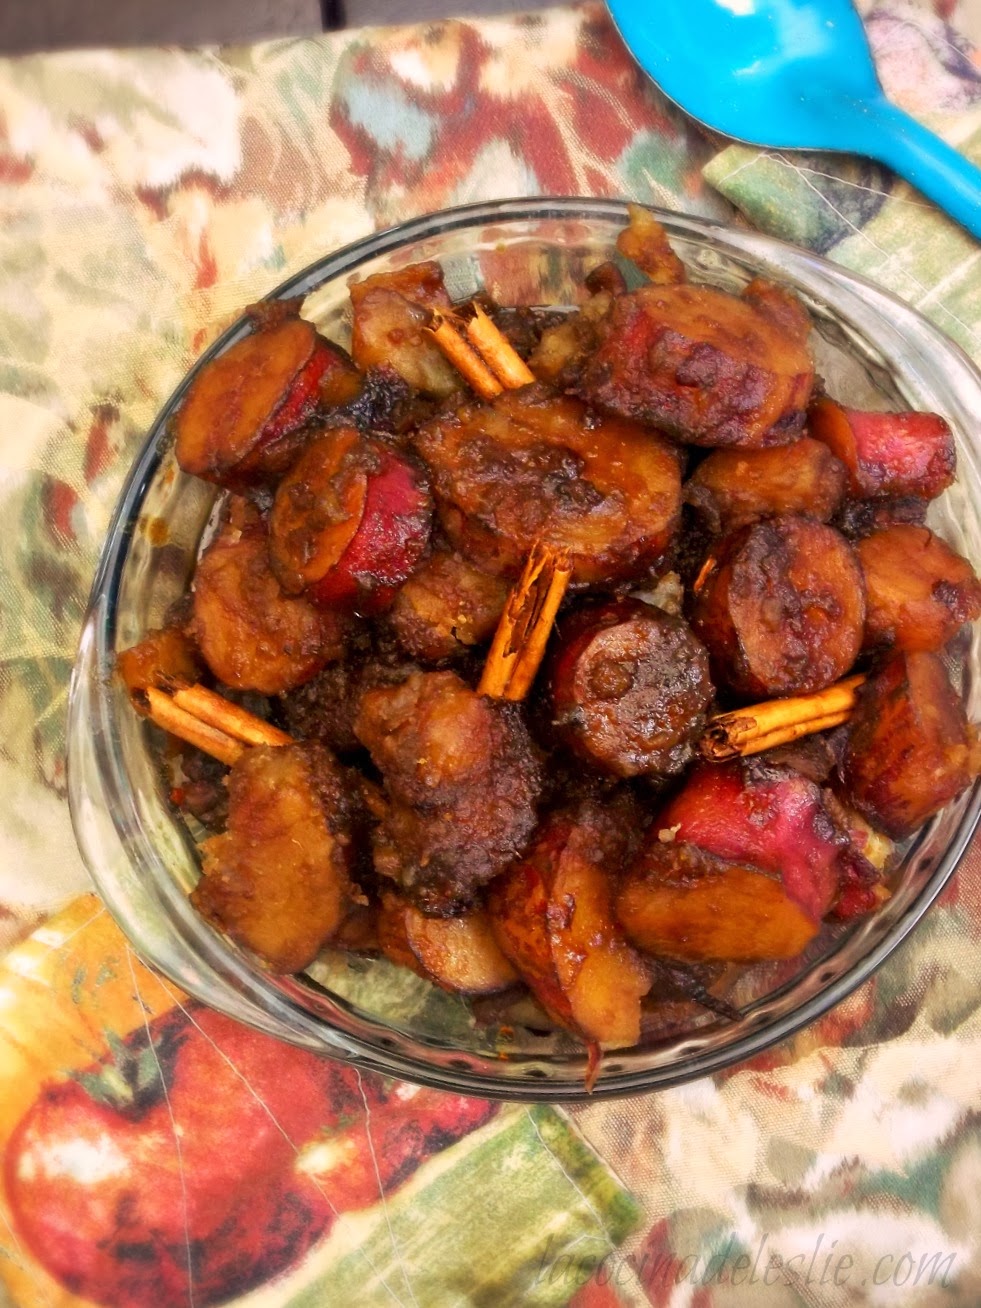 Camotes Enmielados (Mexican Candied Sweet Potatoes) #SundaySupper.